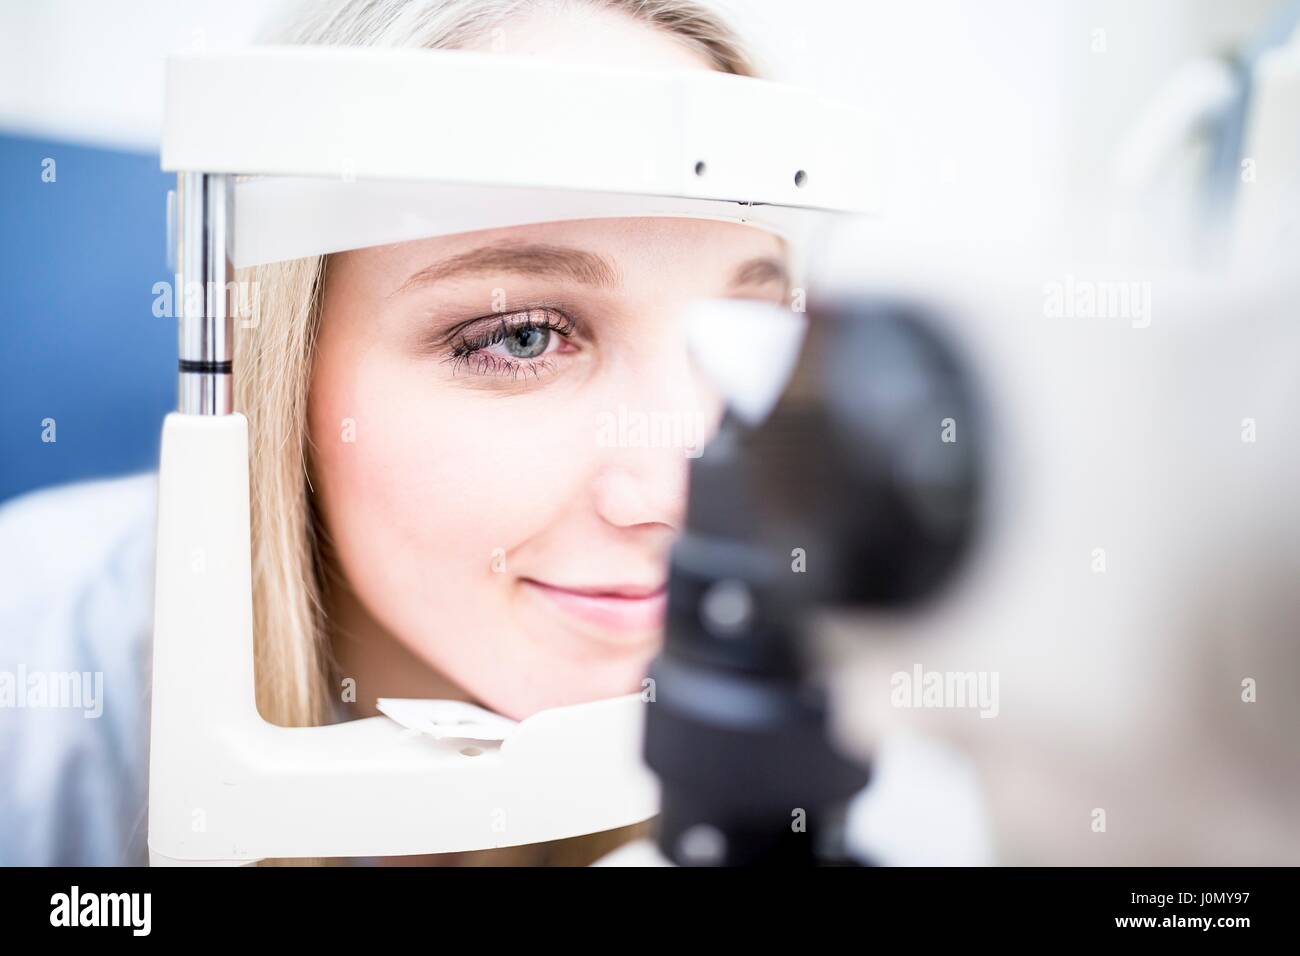 Eye examination of young woman with slit lamp. Stock Photo